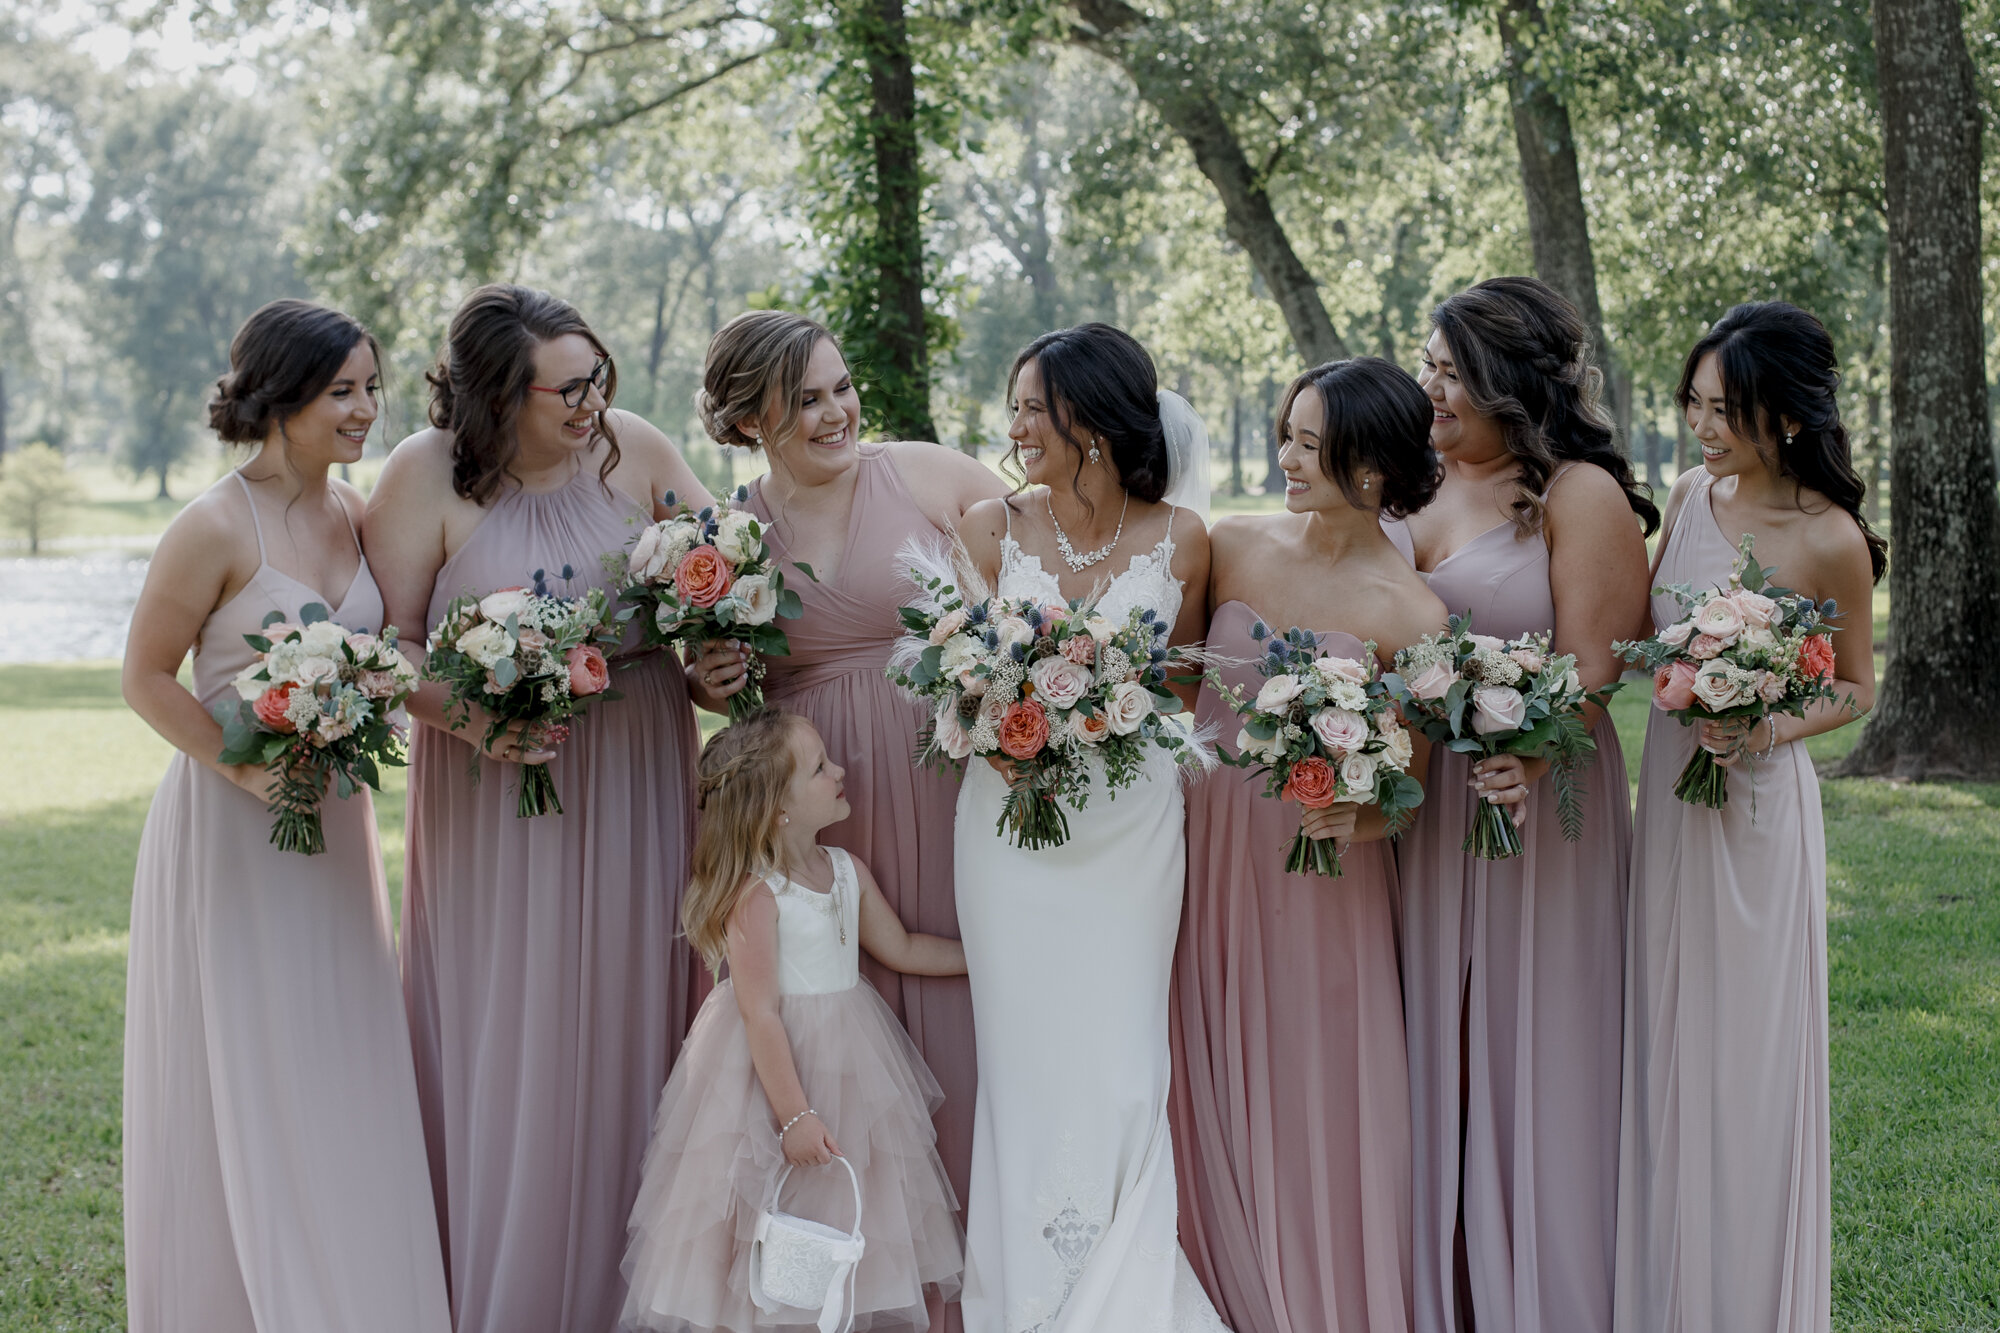 Bride, bridesmaids and flower girl portraits. Romantic Chic Country Wedding at Rustic Luxury Balmorhea Events&nbsp;Venue in Magnolia, TX